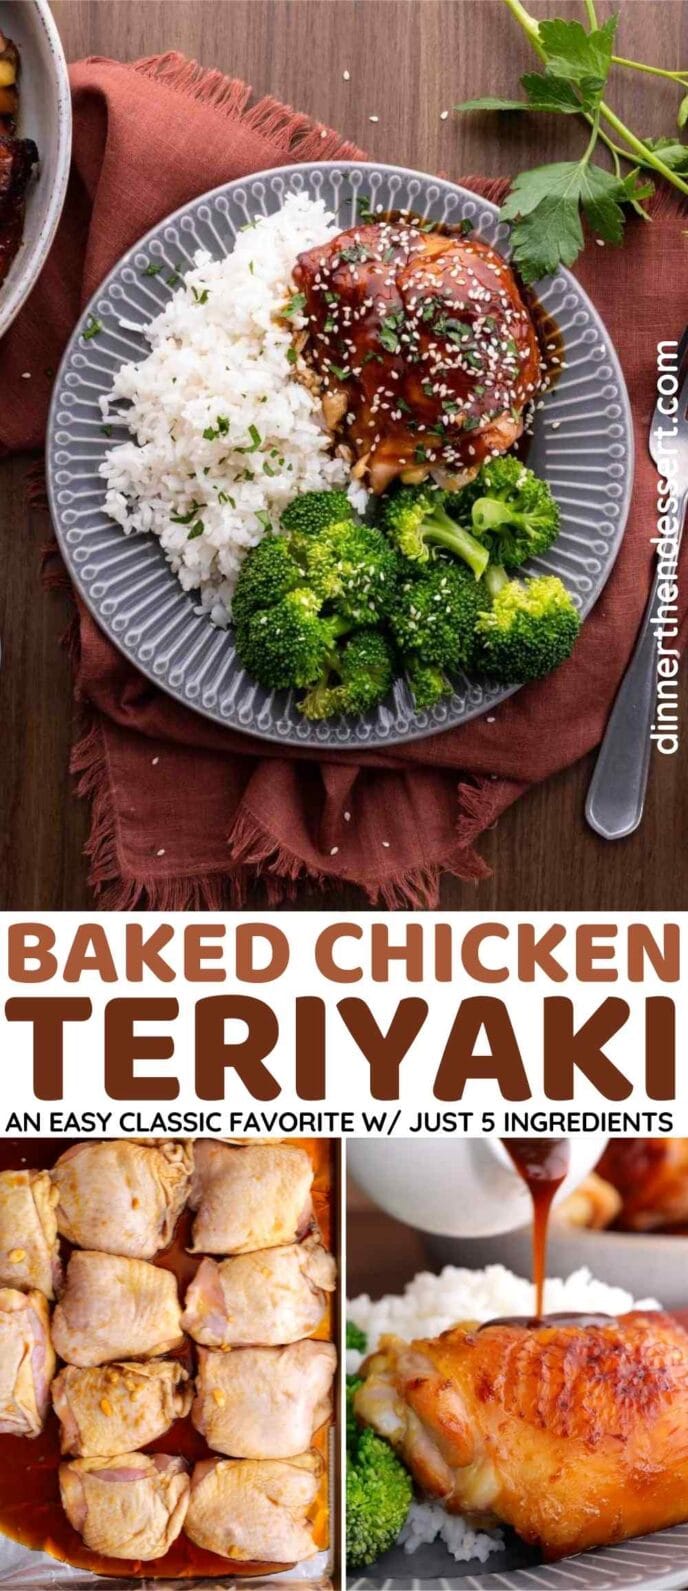 Classic Baked Teriyaki Chicken Collage